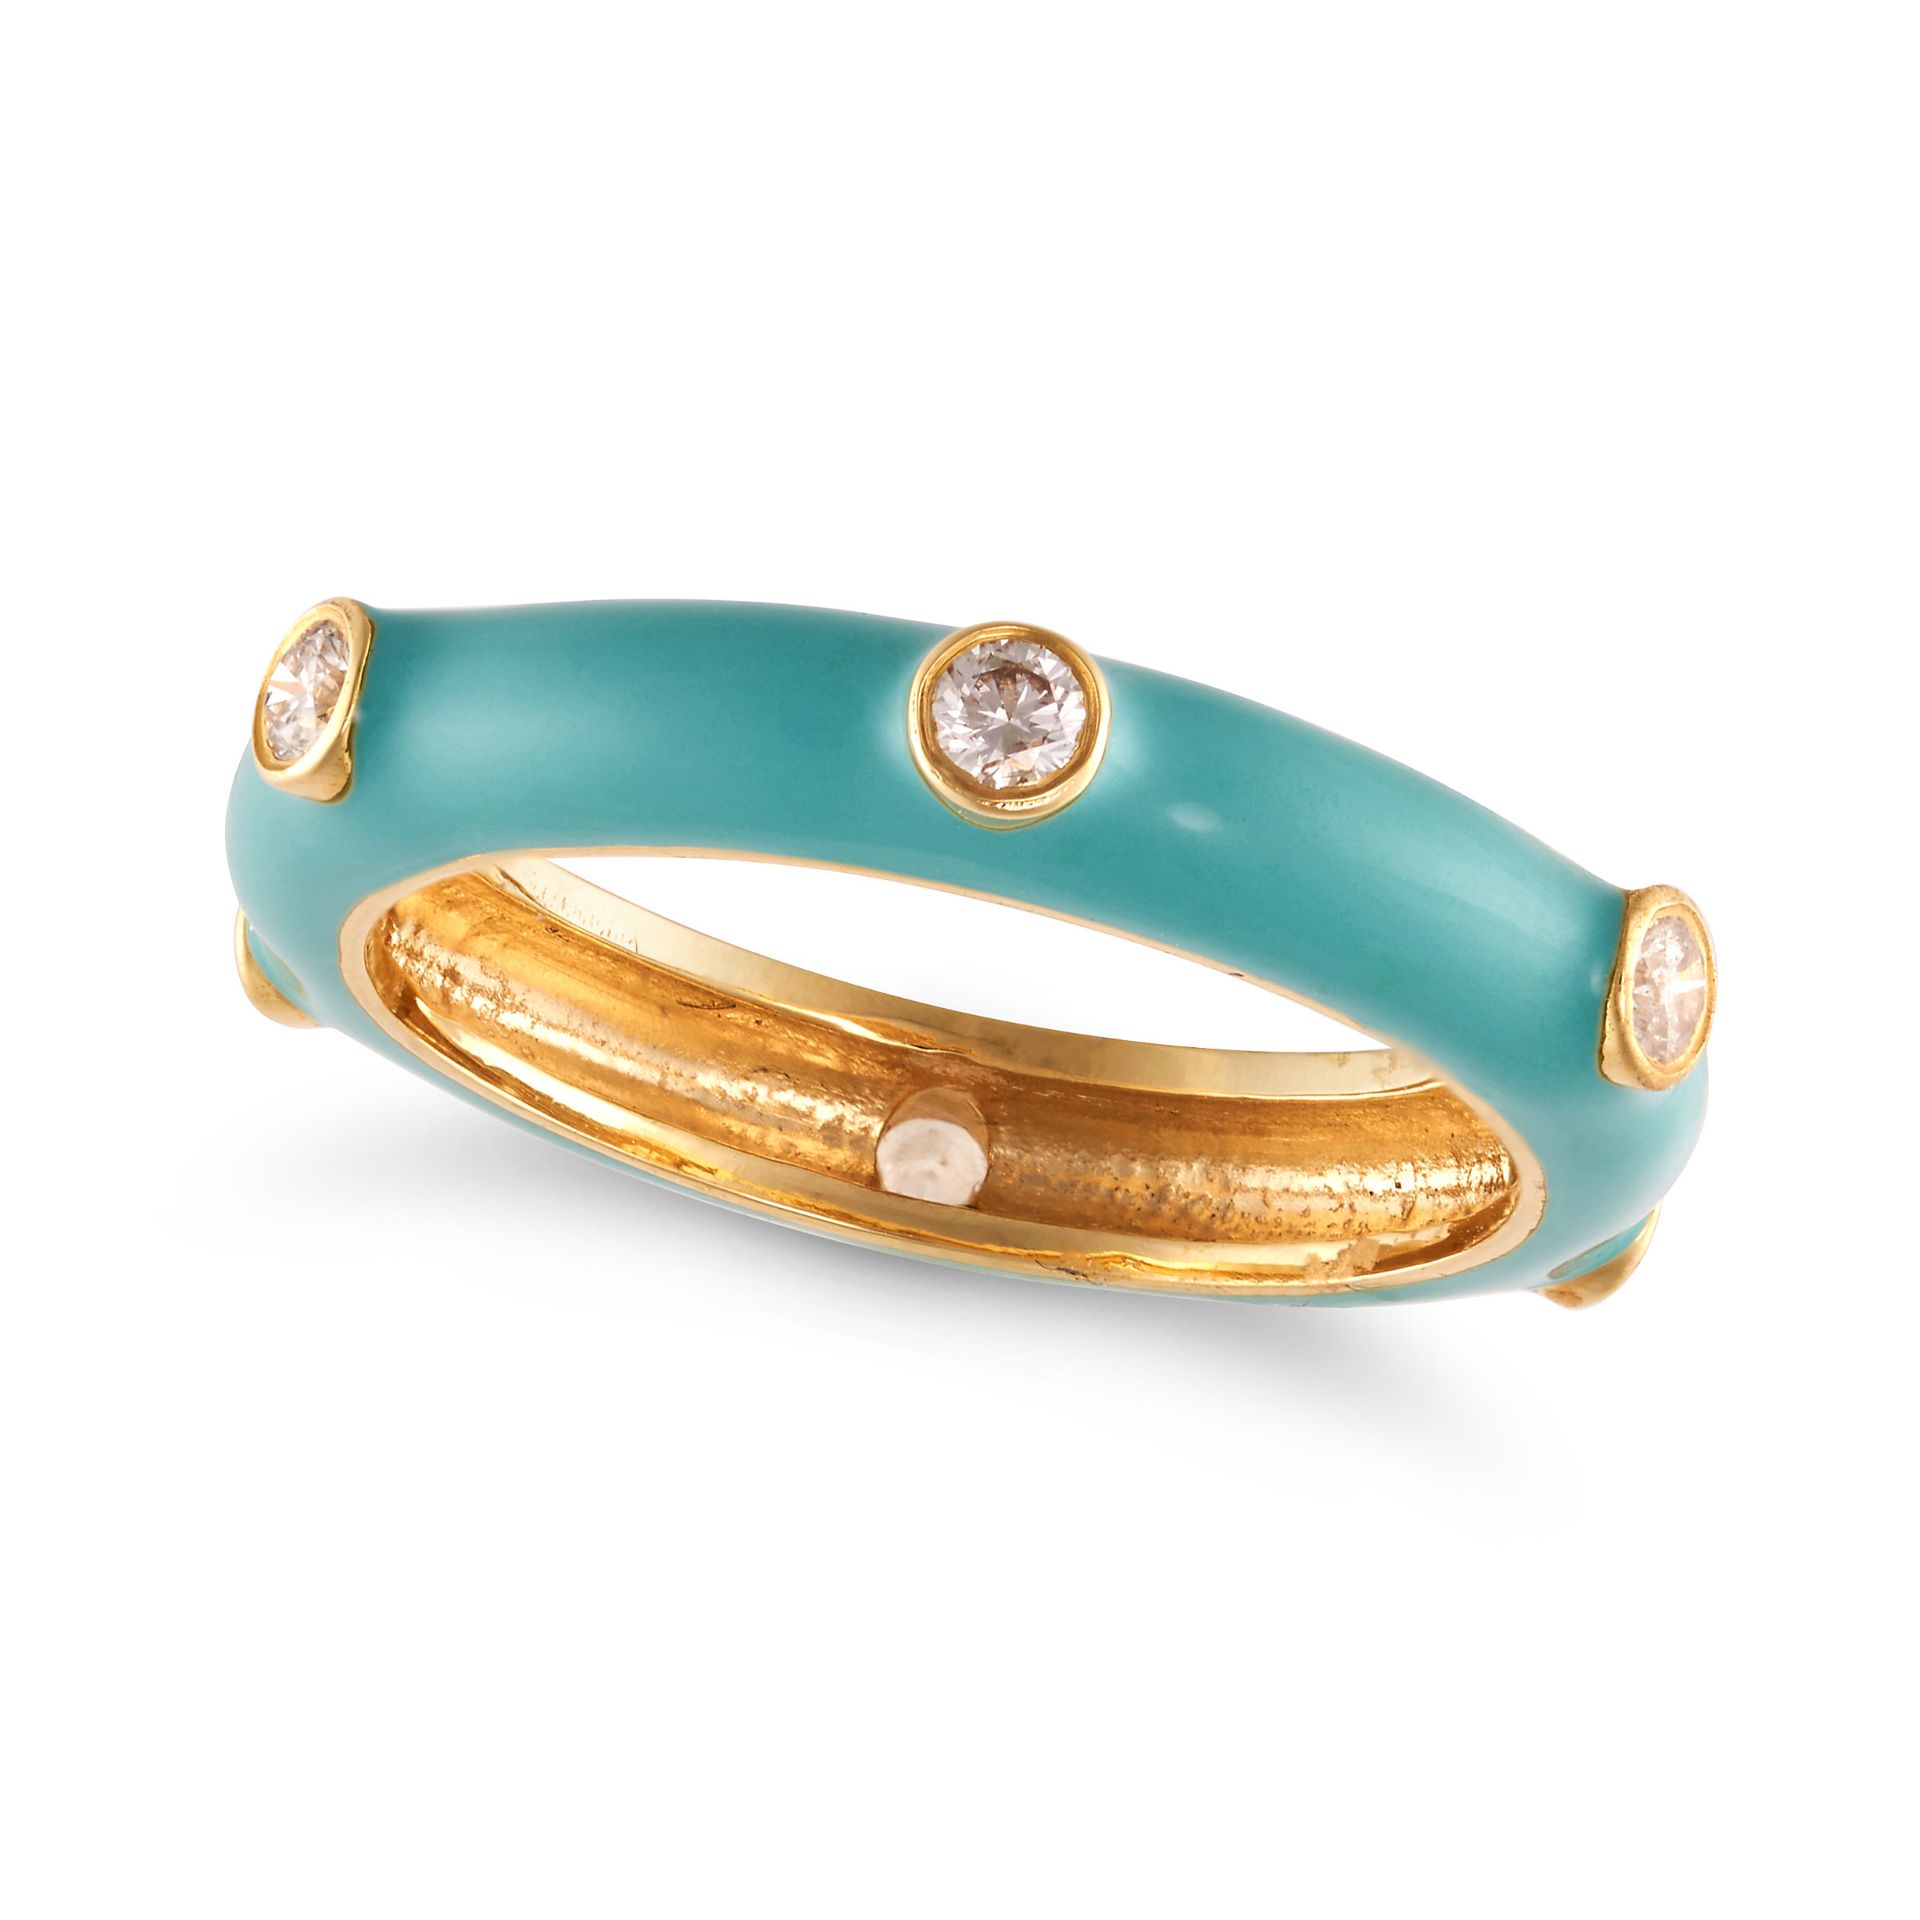 AN ENAMEL AND DIAMOND RING in 18ct yellow gold, the turquoise enamel band set with round brillian...